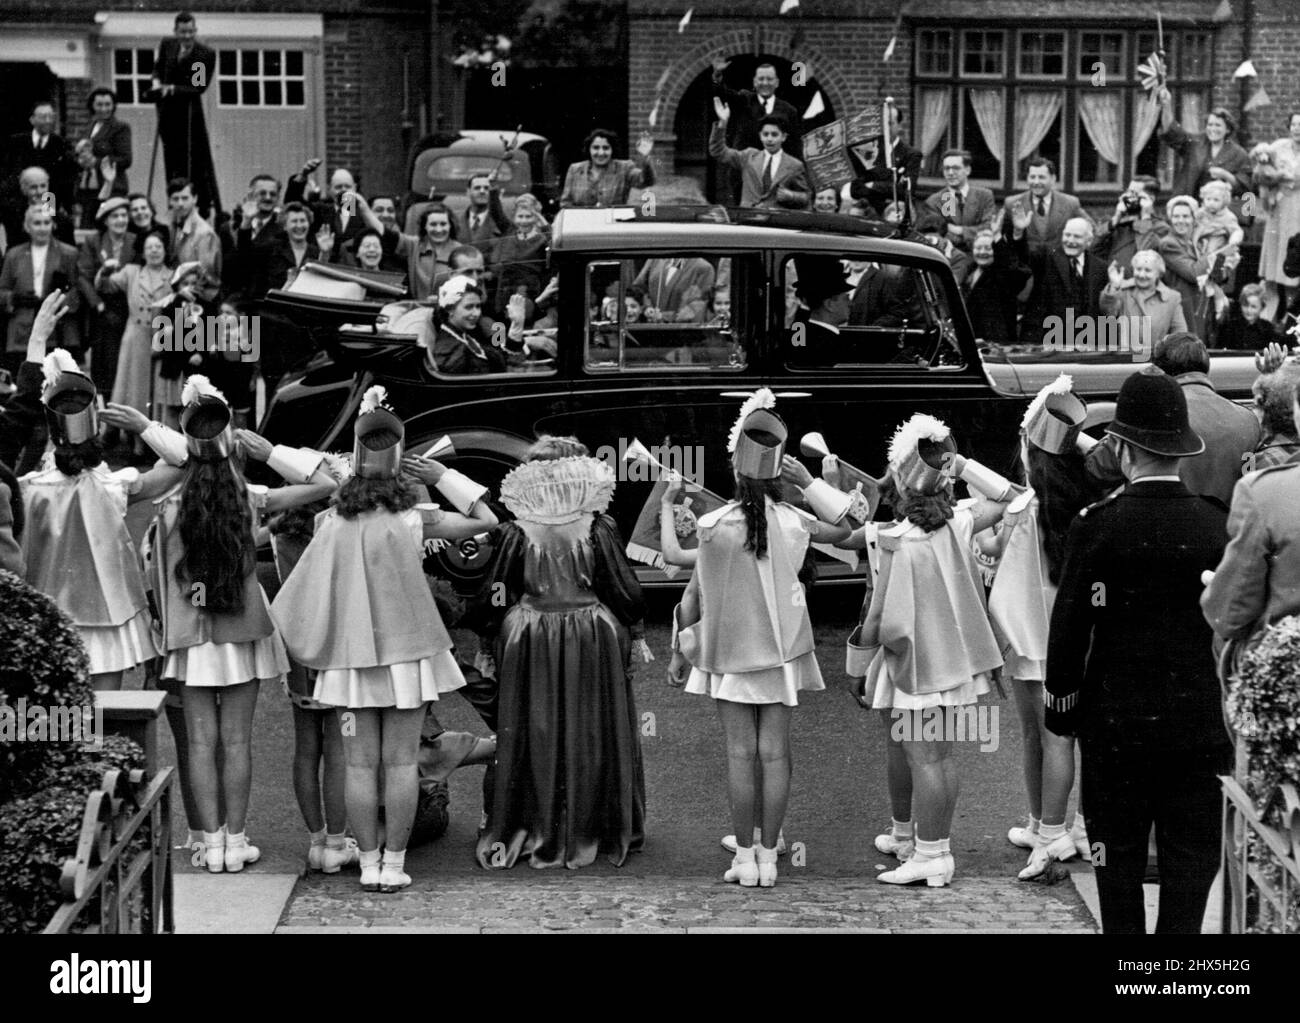 Salutes, and a fanfare of trumpets...This was the scene when 'Queen Bess' and her 'Court' - Children of Acton - welcomed the Queen and the Duke of Edinburgh. The Queen and the Duke wave back delightedly, as they drive slowly by an open car on their Coronation tour of North-West London, yesterday. All along the a day of 'People's pageantry.' June 05, 1953. (Photo by Daily Mirror). Stock Photo